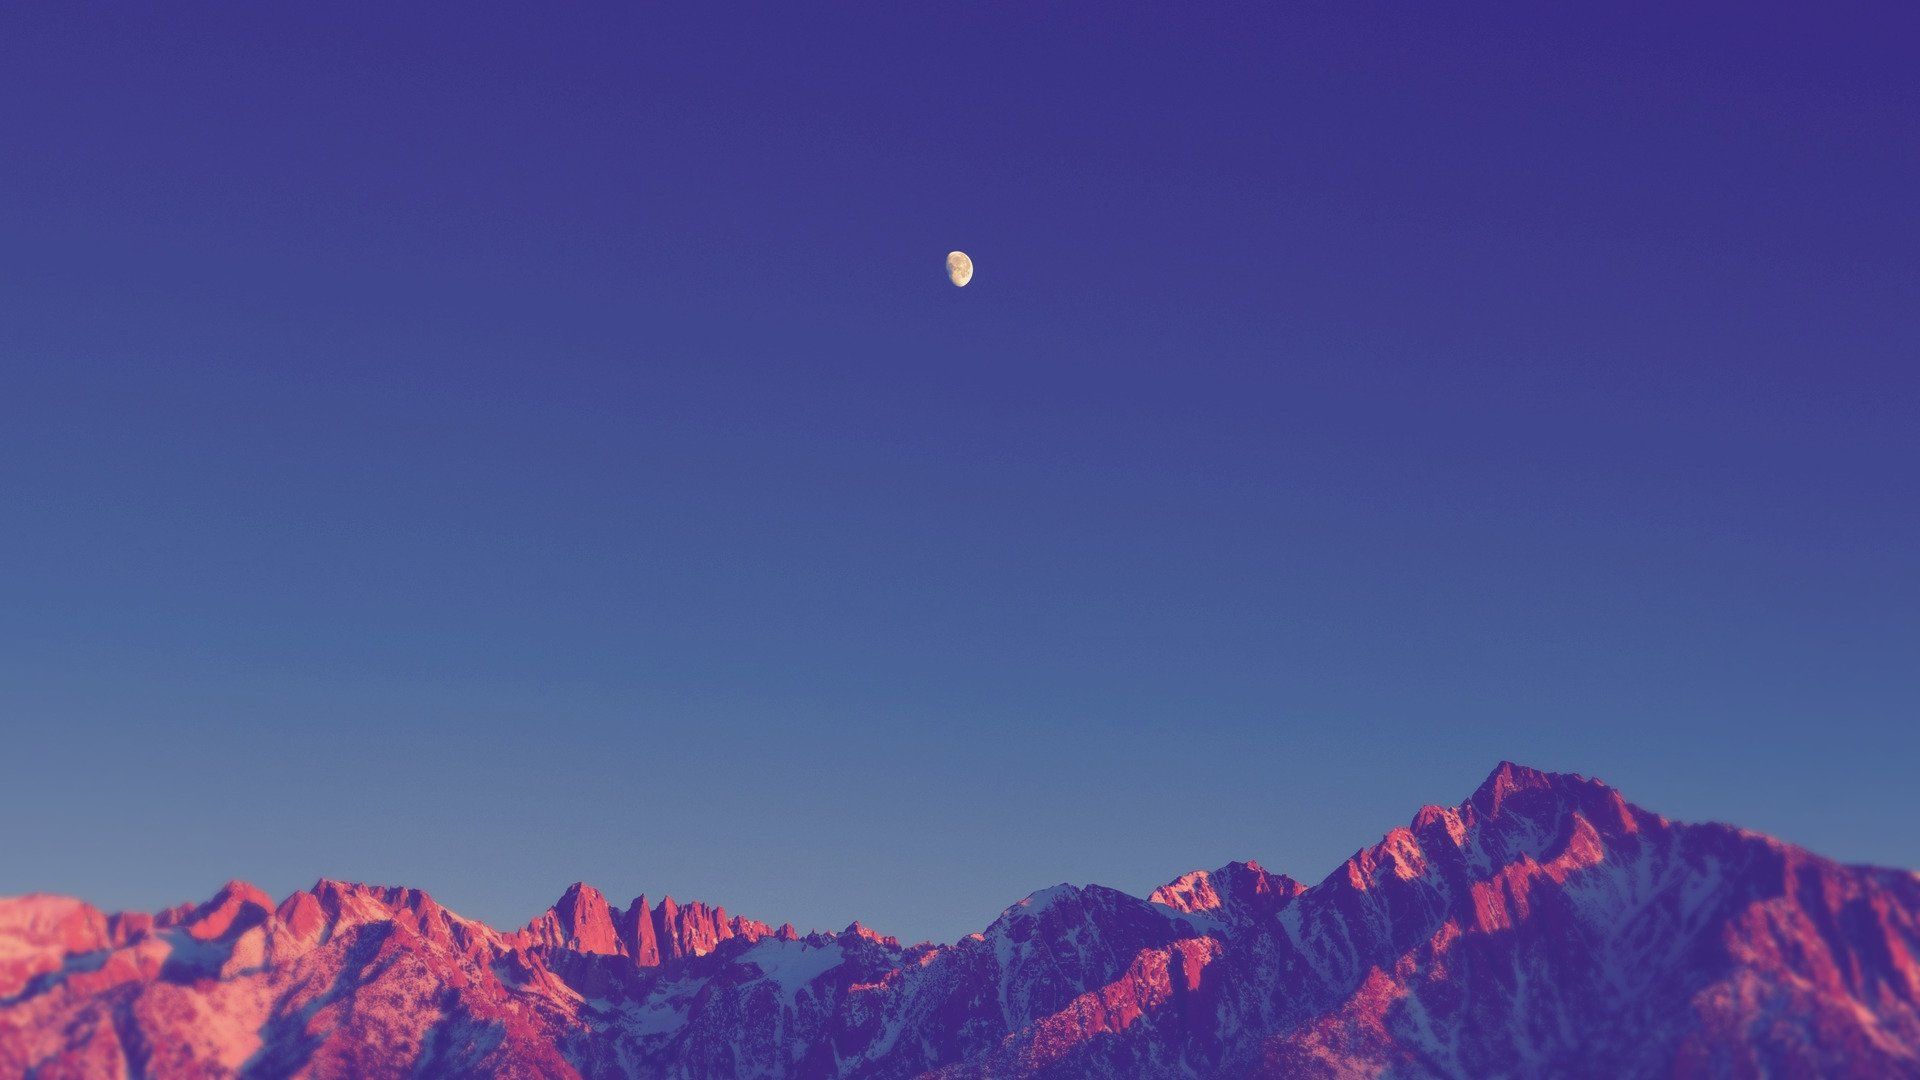 Moon over the mountains wallpaper 1920x1080 - 1920x1080